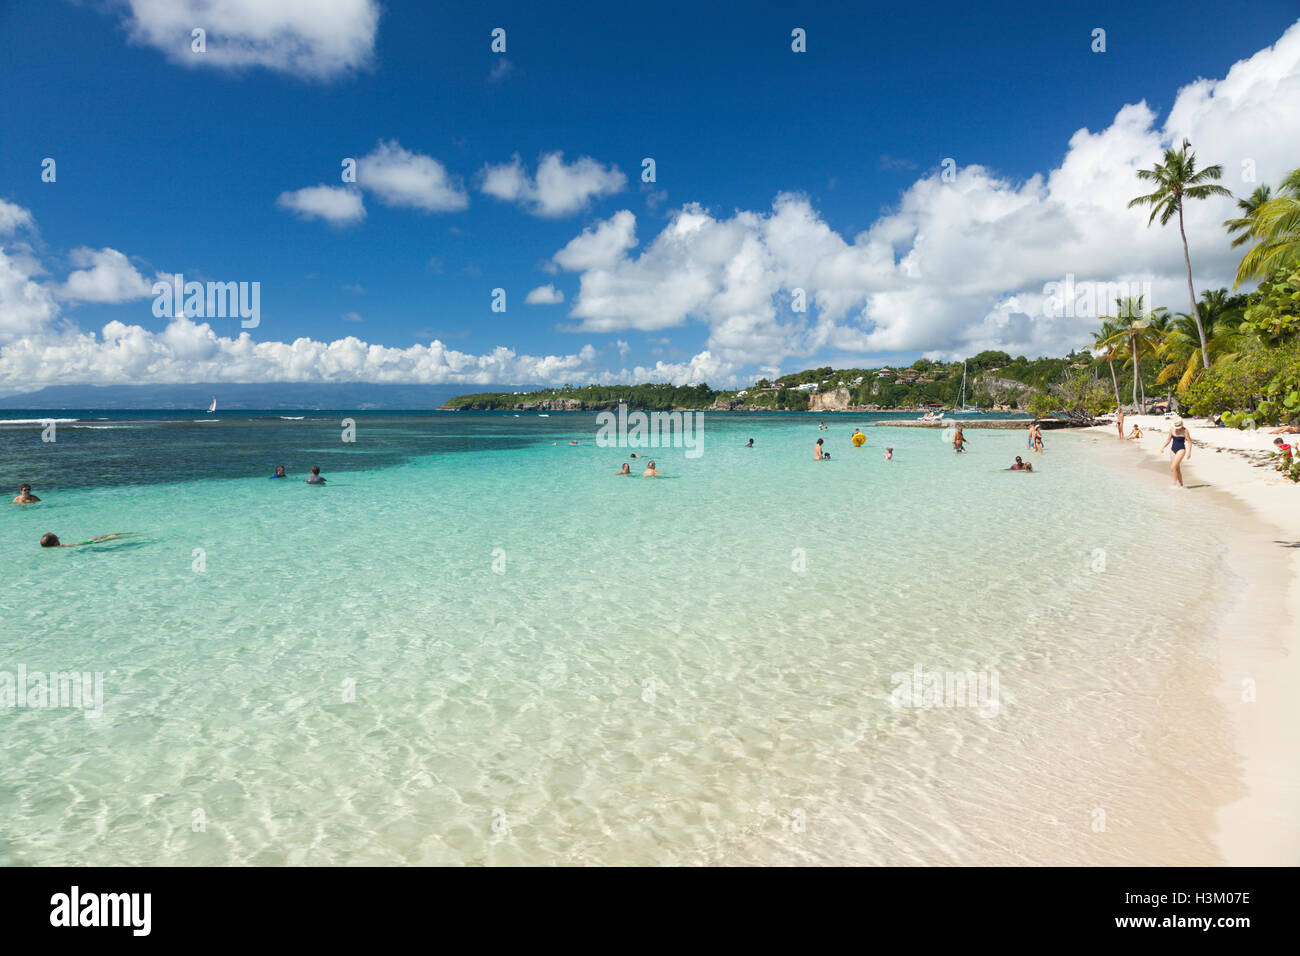 People at the beach of Club Med La Caravelle, Grande-Terre, Guadeloupe Stock Photo